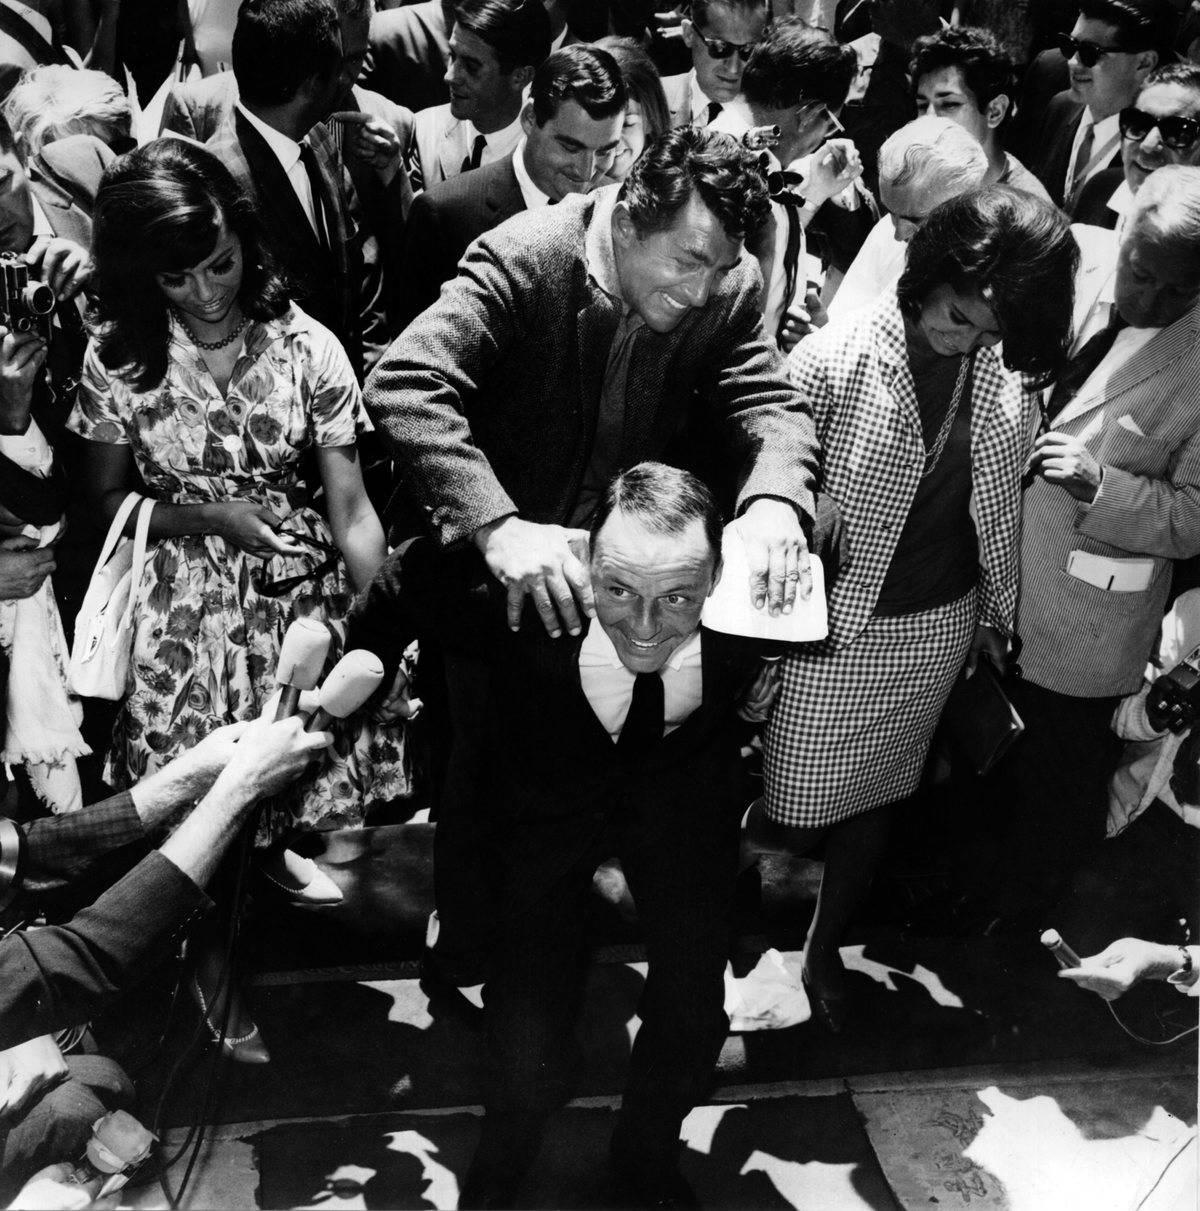 <p>On July 20, 1965, the grounds surrounding Grauman's Chinese Theatre in Hollywood, California, were packed for a handprint ceremony for singer Frank Sinatra. </p> <p>As you can tell from the picture, fellow singer, Dean Martin, was very happy for his long-time friend.</p>